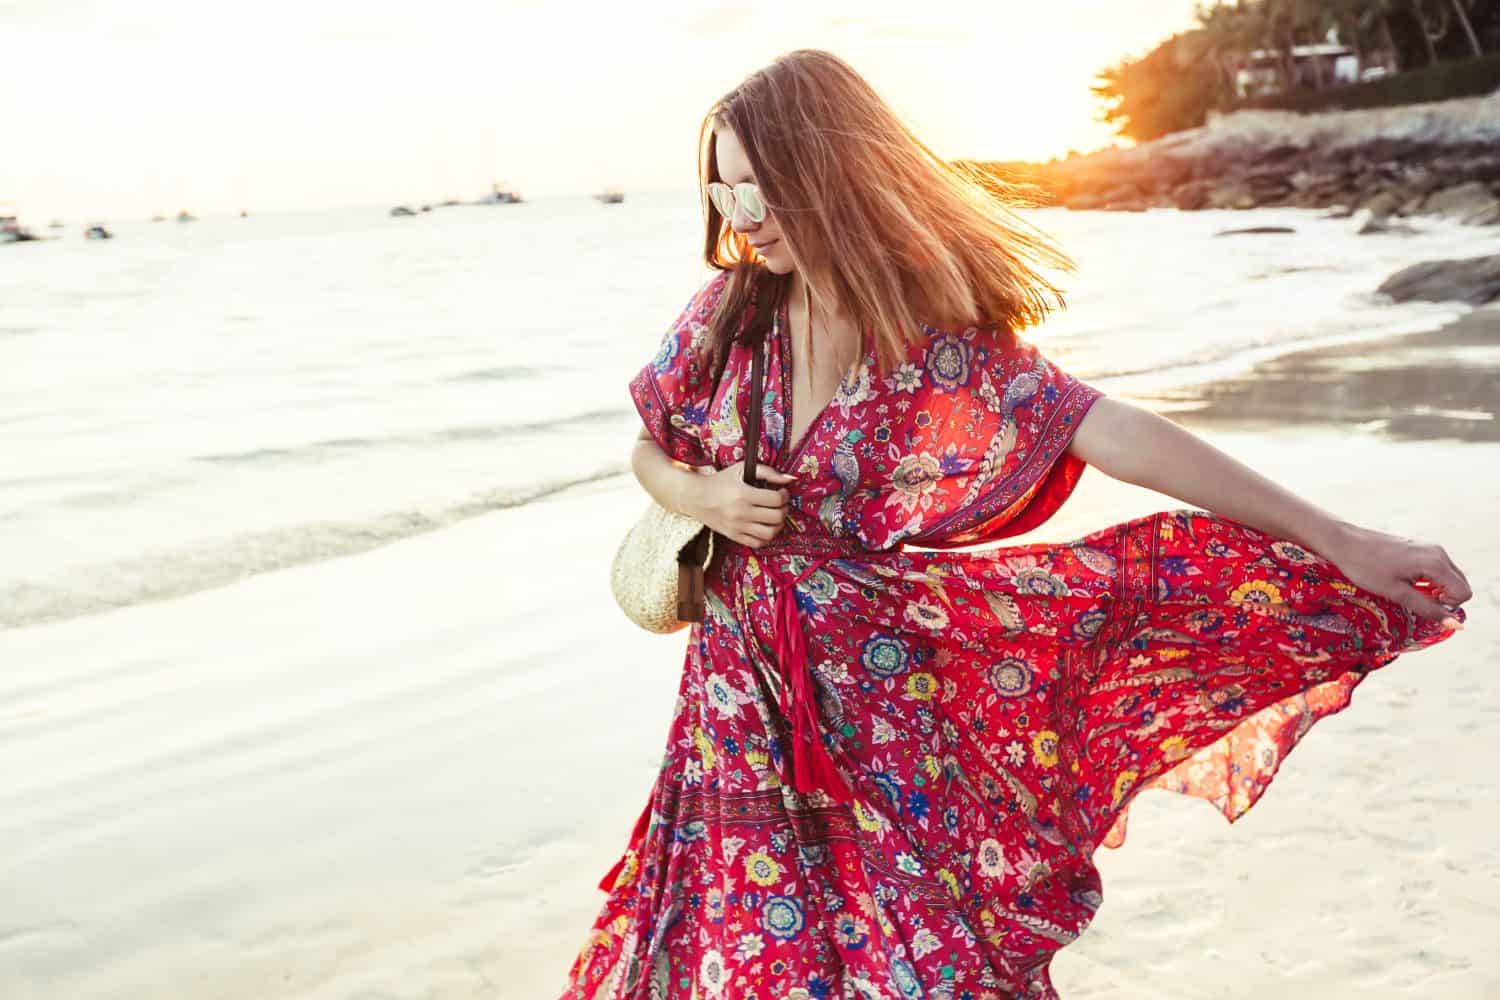 Young beautiful girl wearing boho maxi dress walking on sand. Summer fashion clothes for the beach.